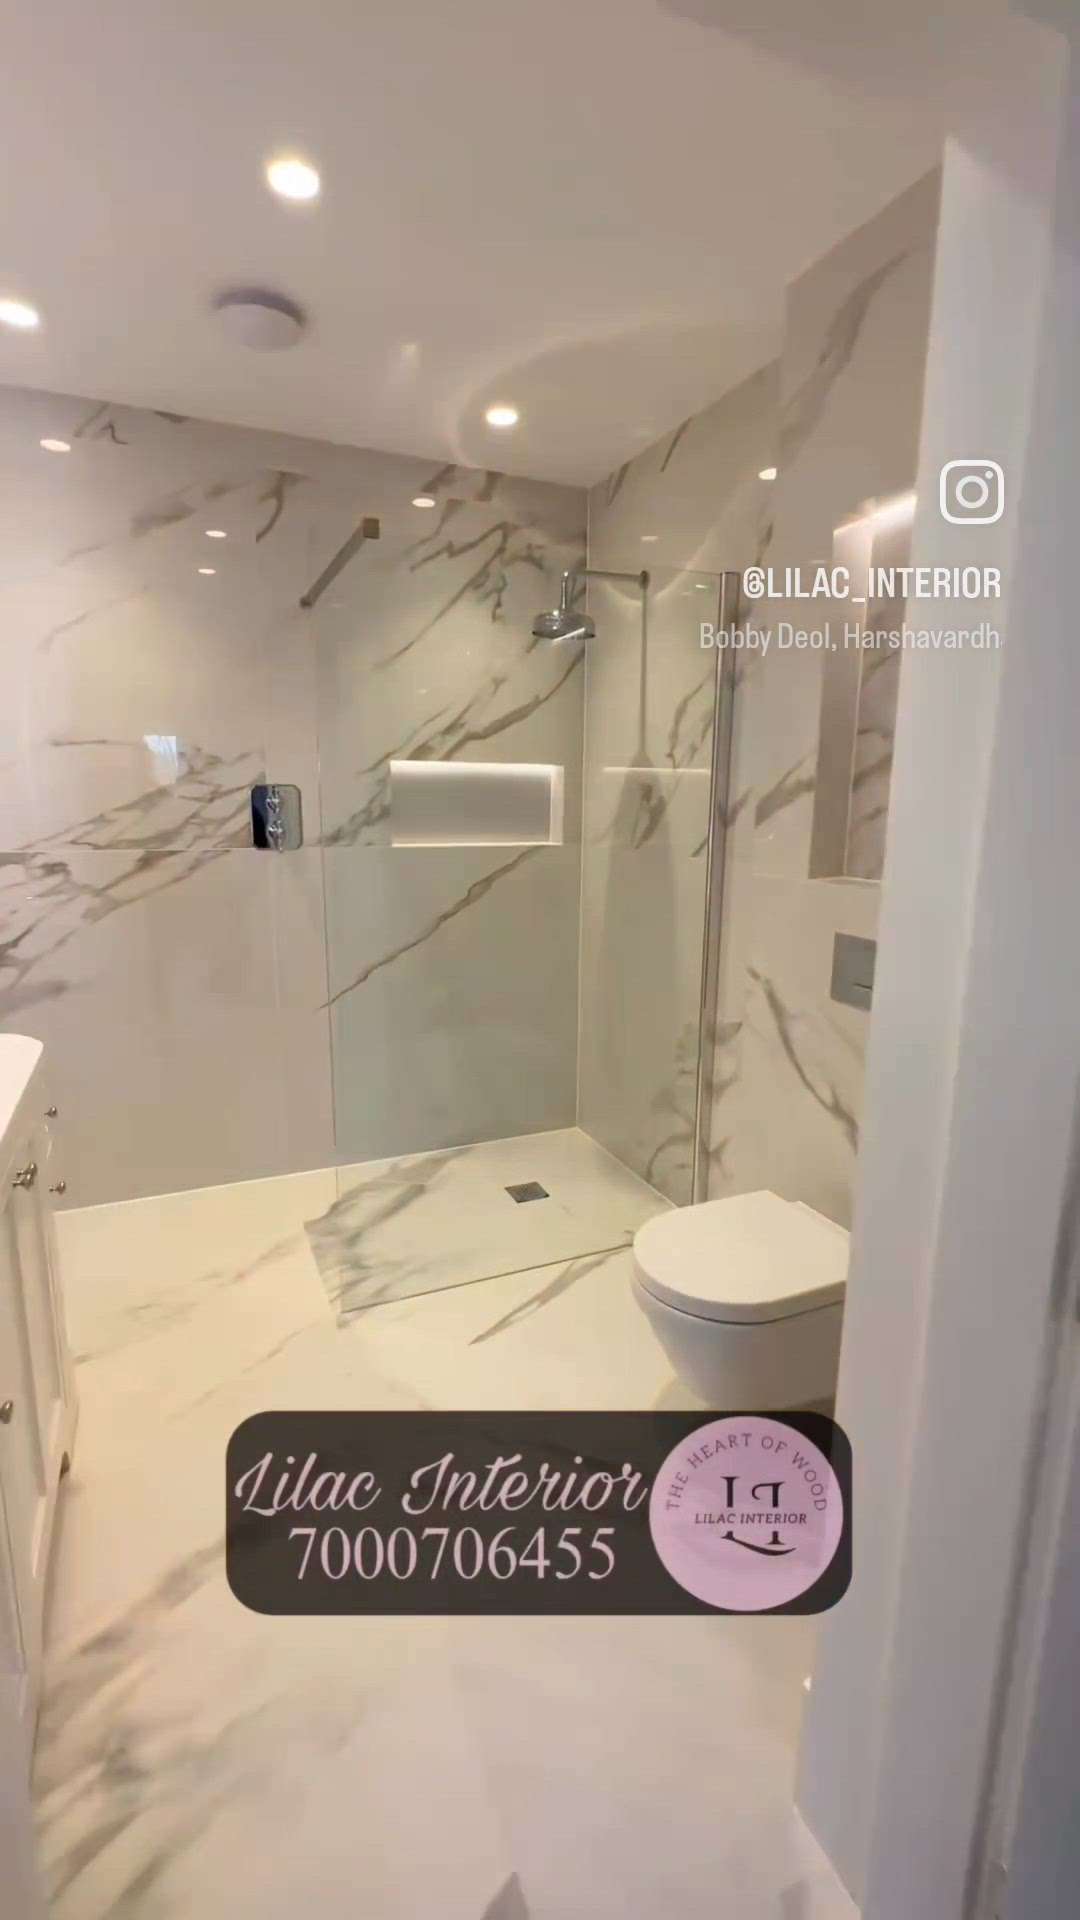 Modern Bathroom Make by Lilac Interior 🤩❤️

#bathroomdesign
#trendingreels
#interioresdesign
#bathroomremodel

📞Contact for work - 7000706455 , 7701821801, 9889720650

📩 Comment or DM ' smart ' to order
💻 https://lilacinterior.com

Looking for one-stop interior design solutions for your dream home or office? 😍
At Lilac Interior, we don't just build homes but craft your desires into fresh designs to make you fall in love with your home! ✨
Get your dream home designed by us 💫furniture

Follow 👉@lilac_interior
Follow👉 @lilac_interior
➖➖➖➖➖➖➖➖
#interiordesign #designinterior #interiordesigner #designdeinteriores #interiordesignideas #interiordesigners #designerdeinteriores #interiordesigns #interiordesigninspiration
.
.
#memeindian
#memesociety
#indianjoke
#desitrolls
#idioticsperm
#interiordesign #designinterior #interiordesigner #designdeinteriores #interiordesignideas #interiordesigners #designerdeinteriores #interiordesigns #interiordesigninspiration #interioresdesign